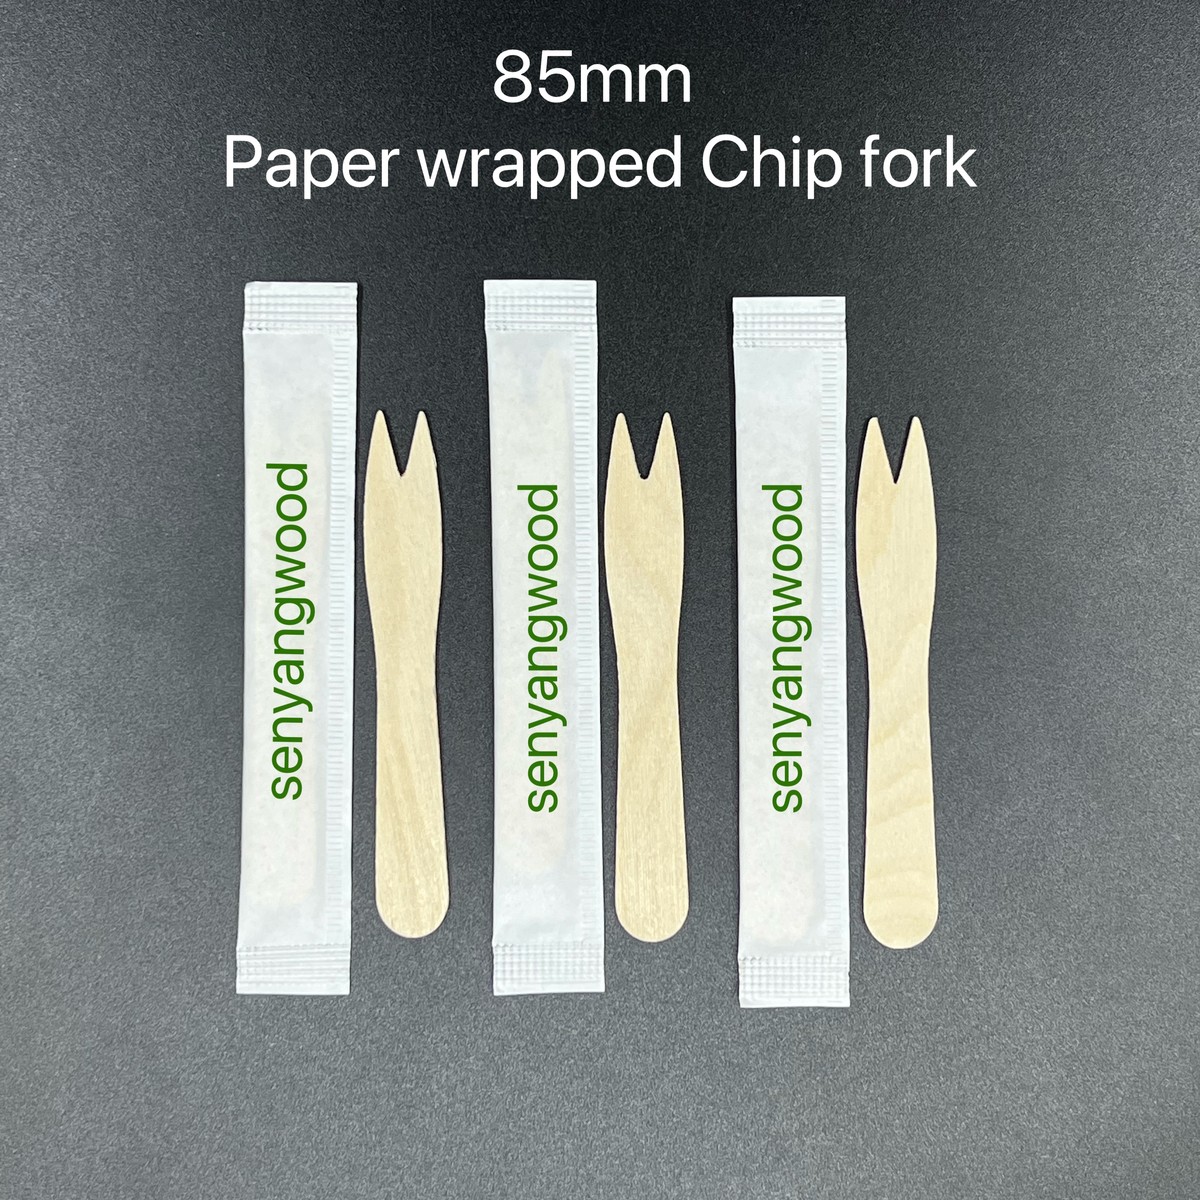 Wooden chip fork with 3 side sealed paper wrapper. 